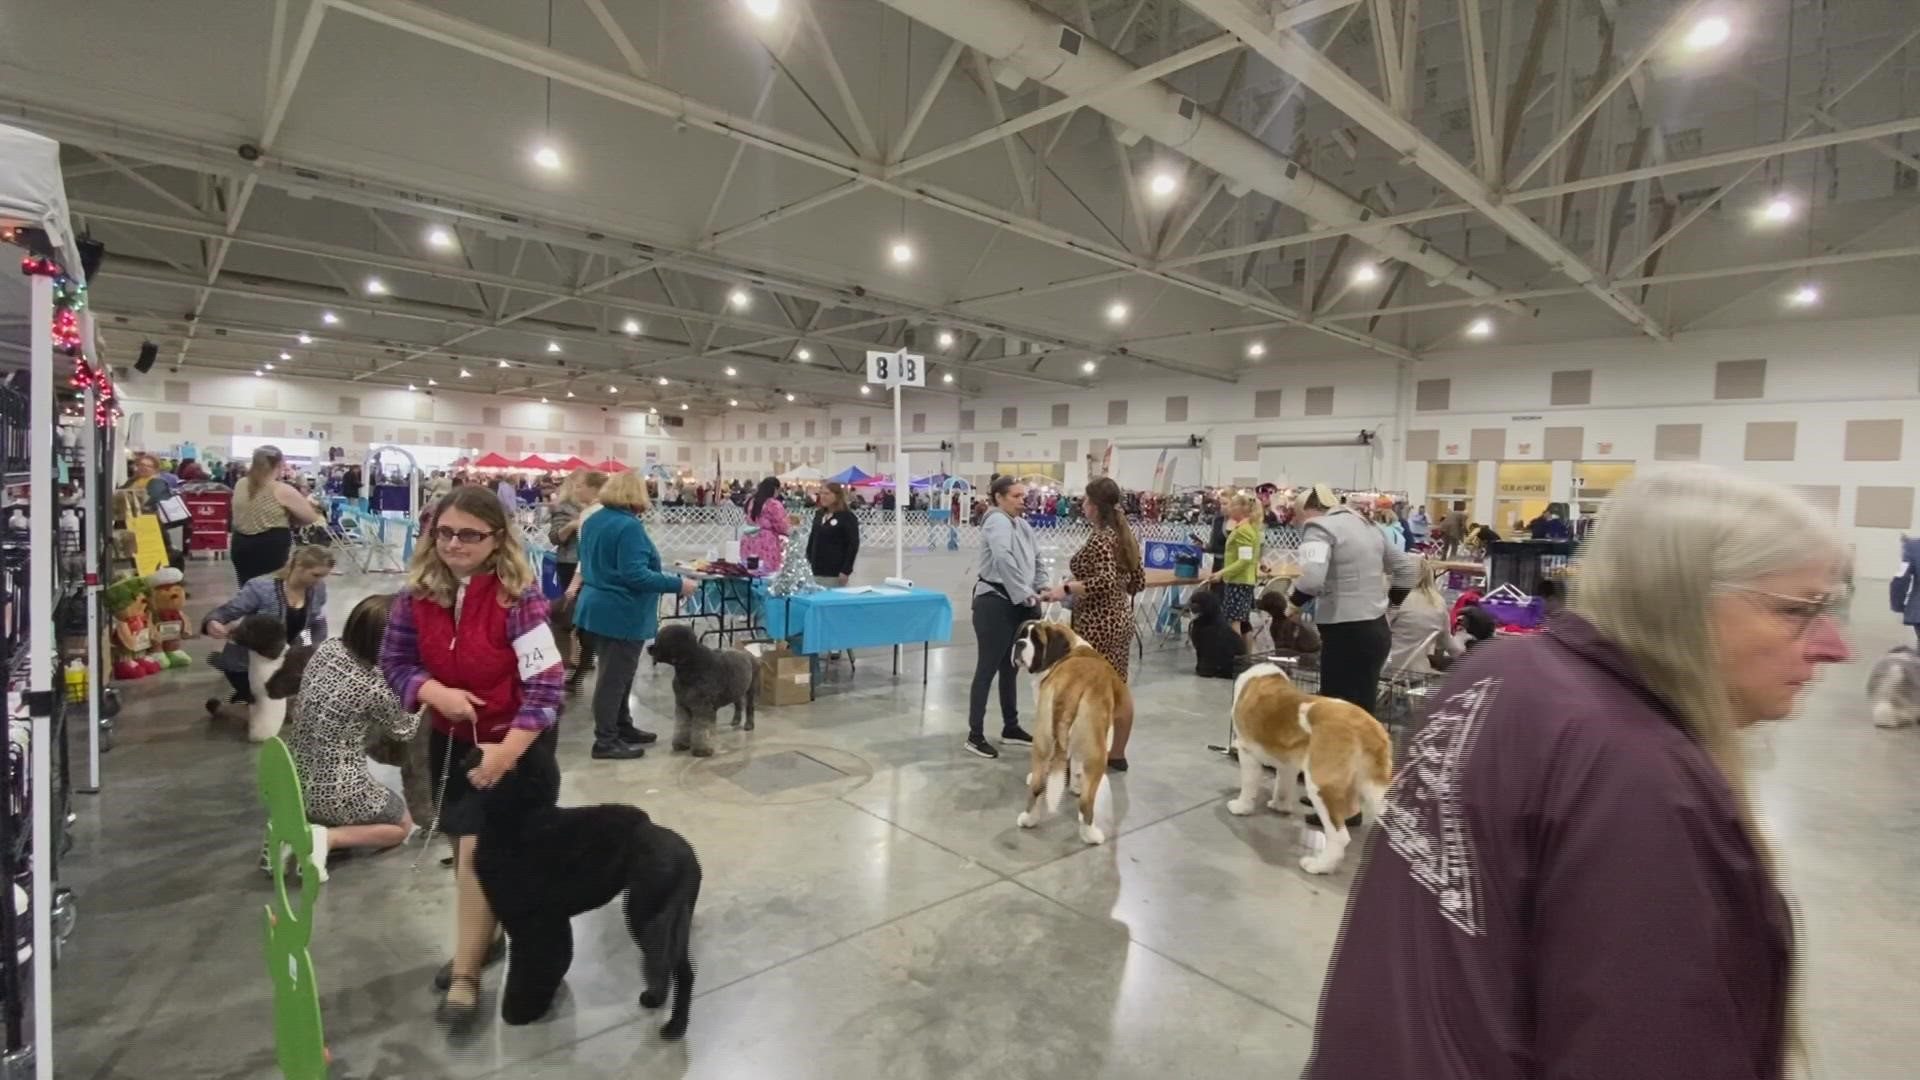 The Winer dog show was hosted in Perry on Saturday.